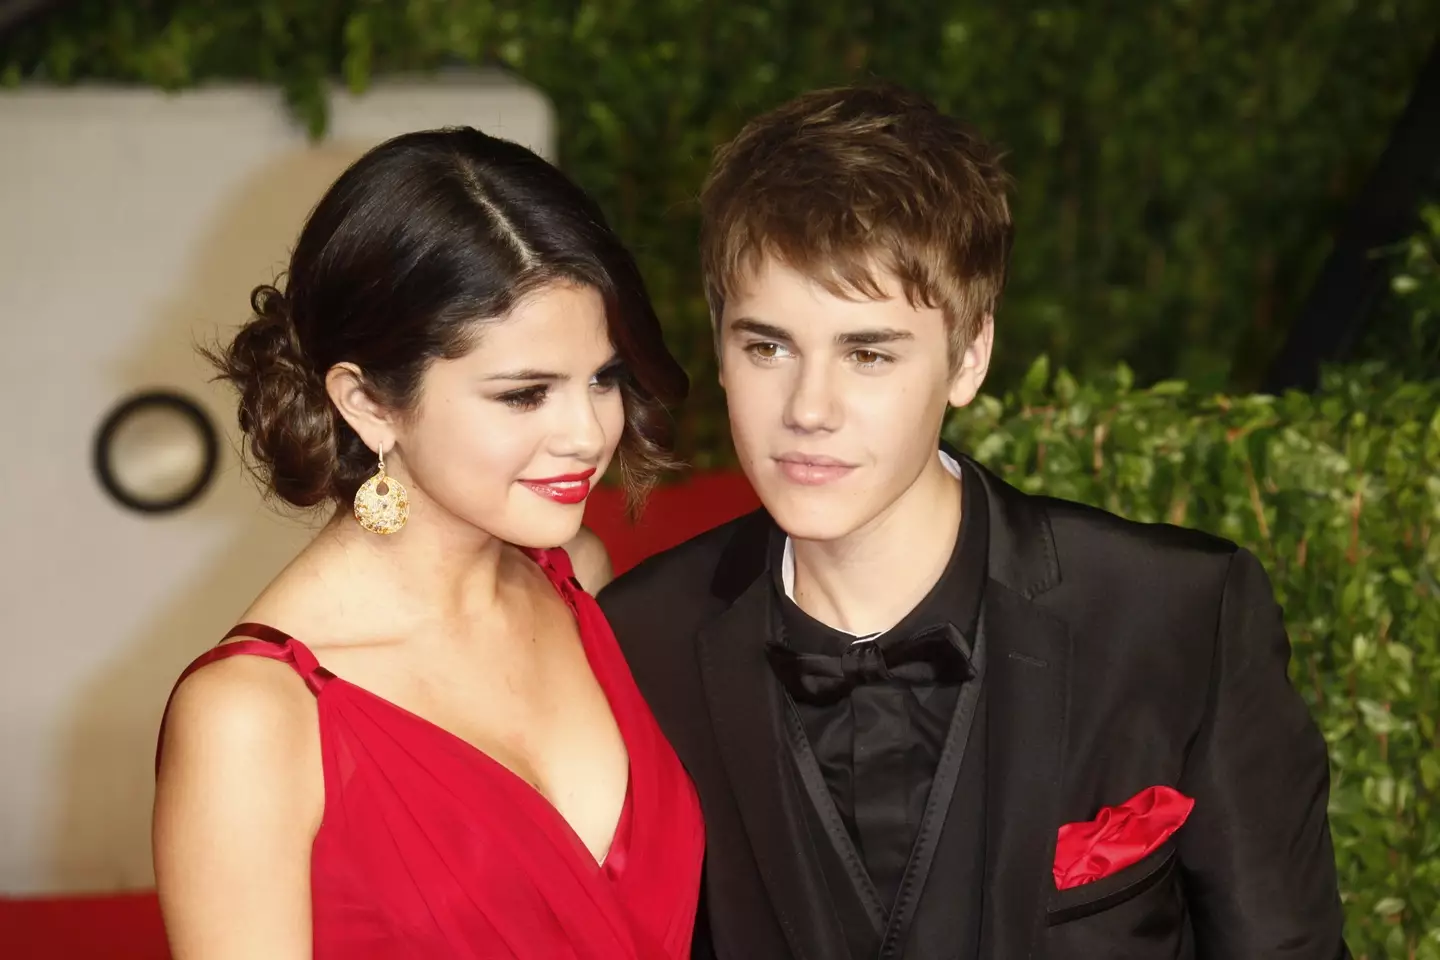 The lovebirds got engaged back in 2018, the same year that Justin rekindled his romance with Selena Gomez.